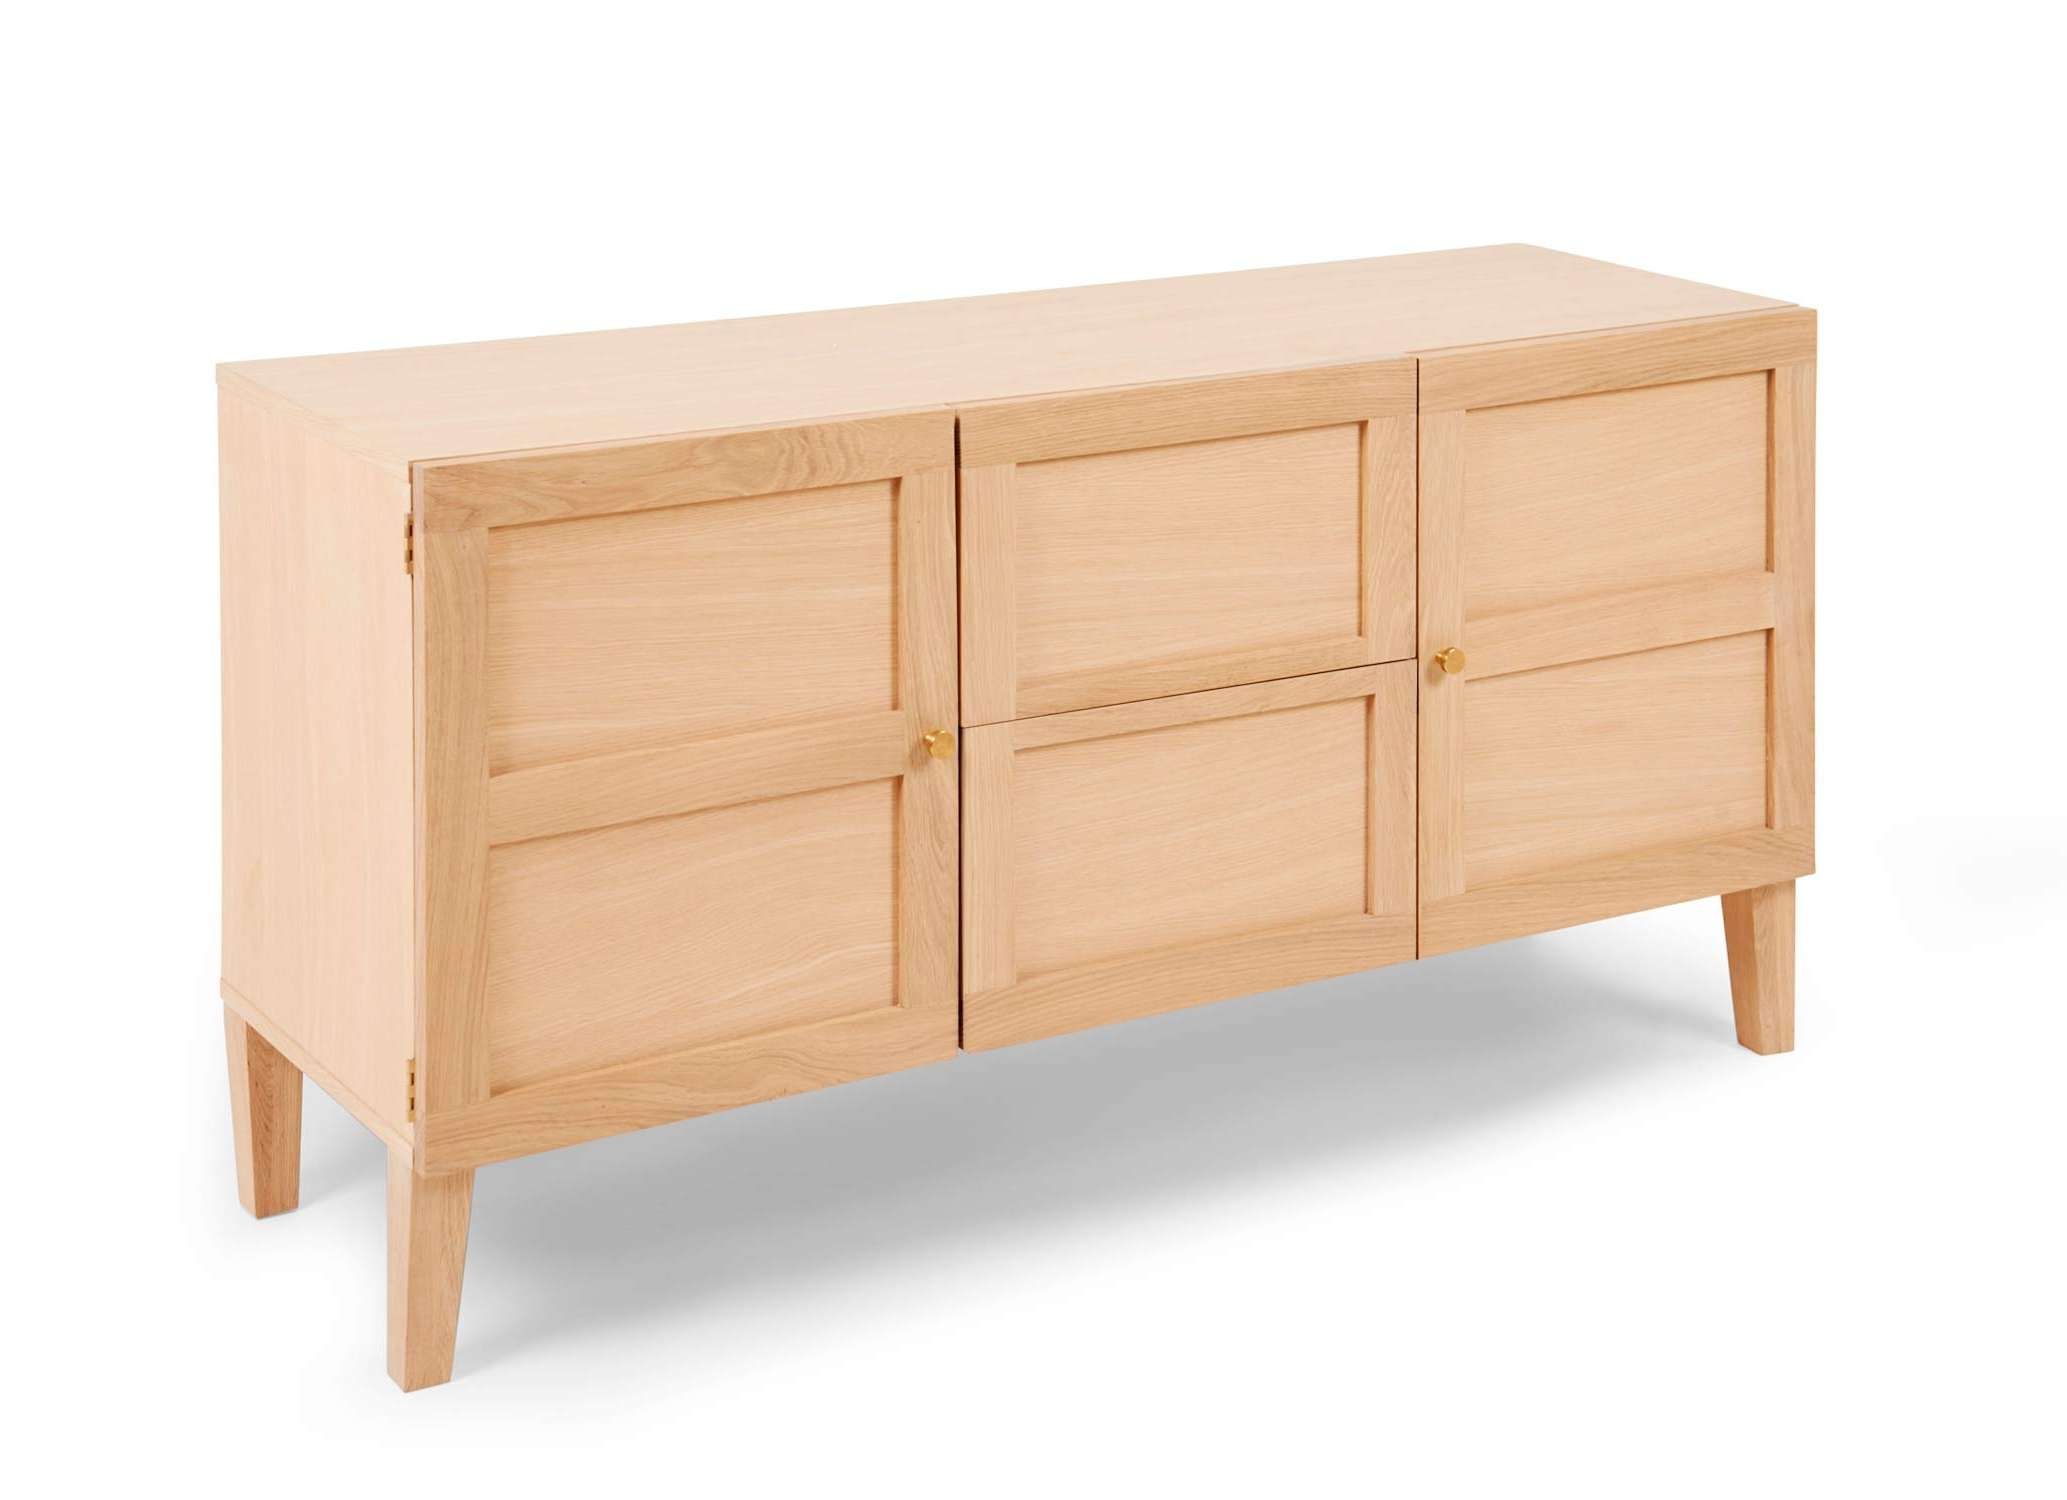 Oak Sideboards – 10 Of The Best | Ideal Home With Marks And Spencer Sideboards (View 13 of 20)